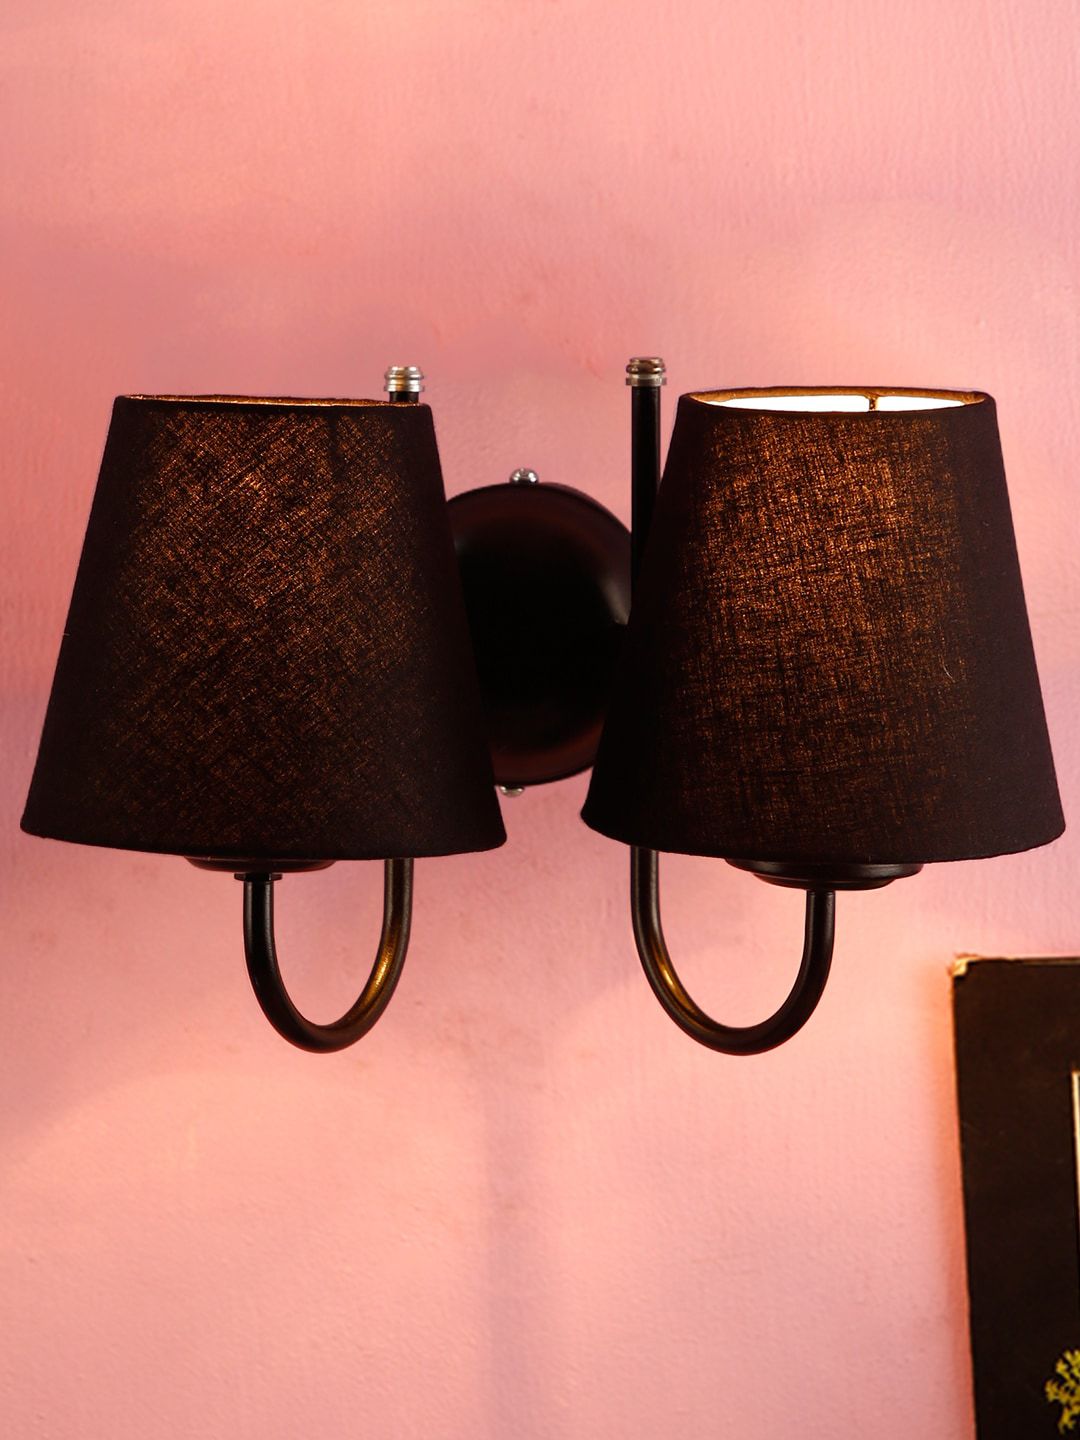 Devansh Black Conical-Shaped Double Wall Mounted Lamp Price in India